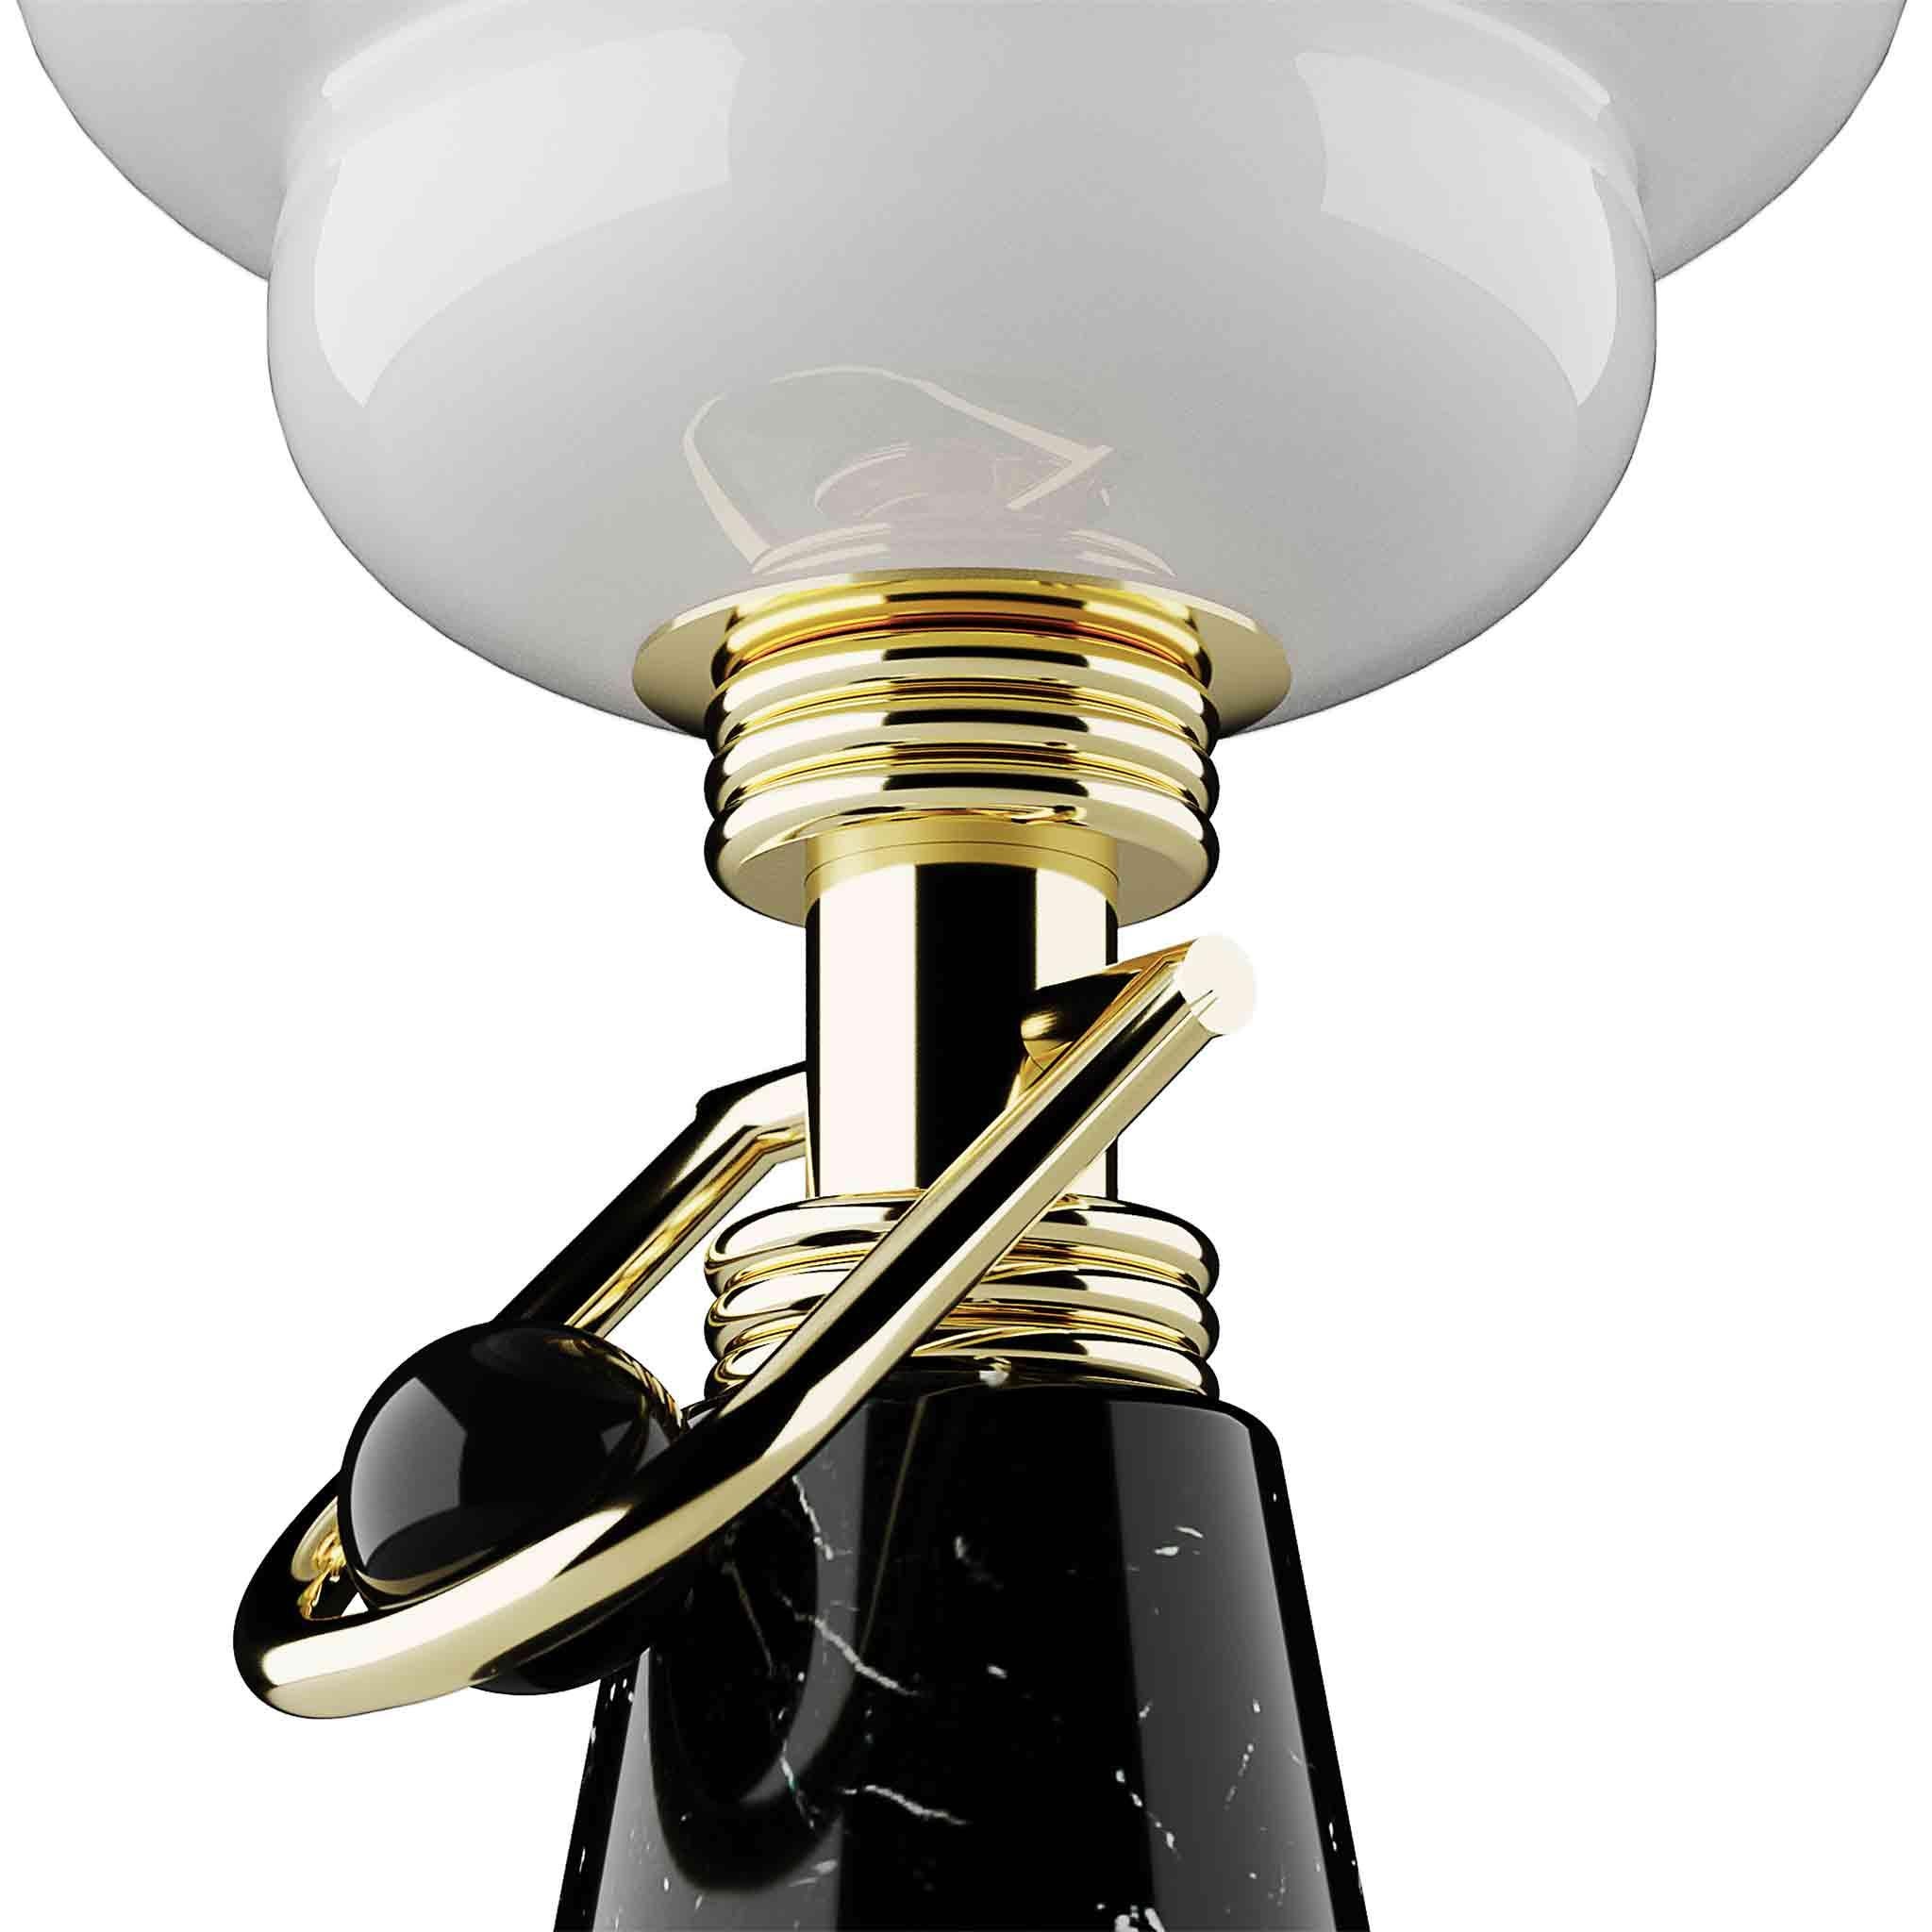 Portuguese Art Deco Style Table Lamp in Negro Marquina Black Marble & Gold Polished Brass For Sale